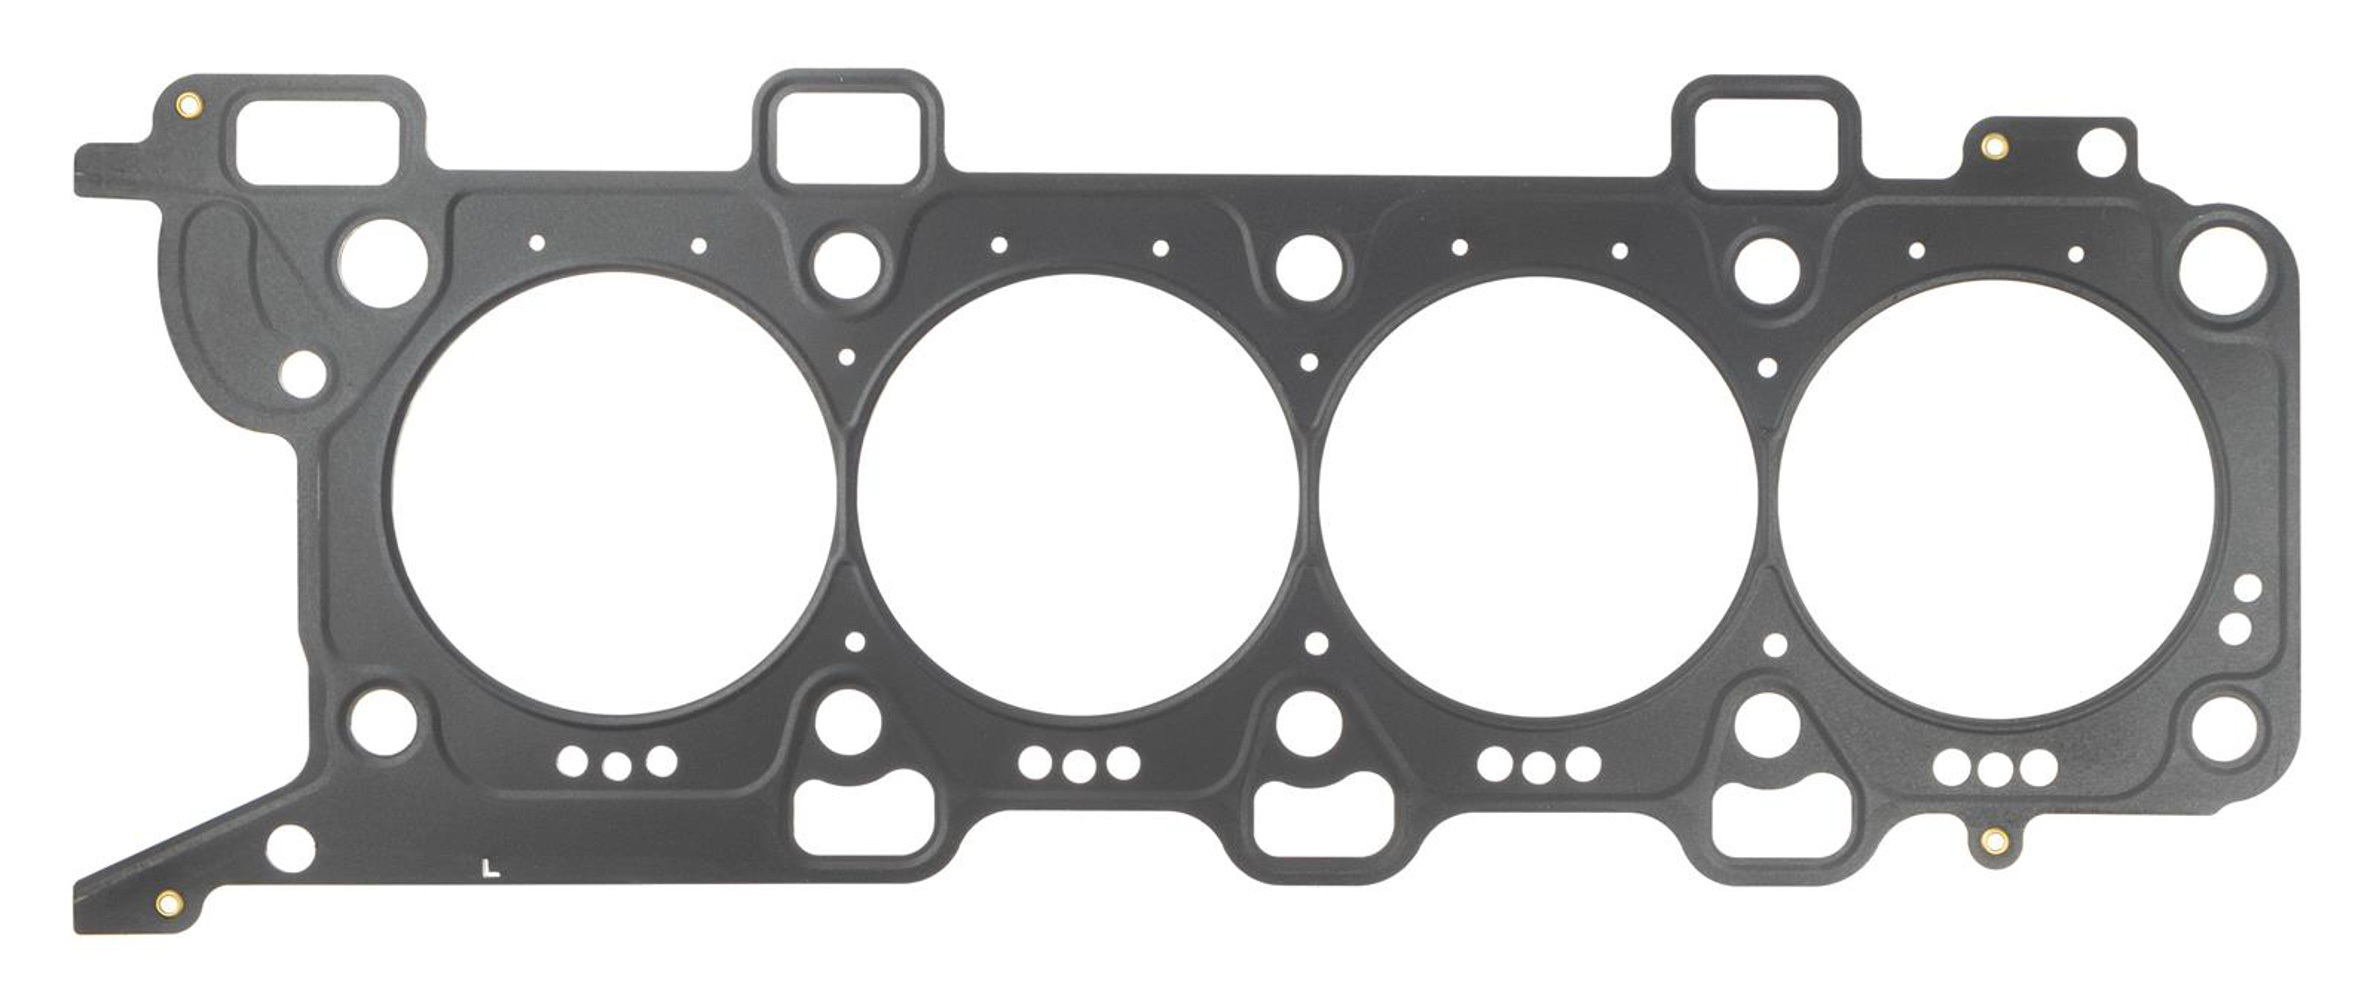 SCE Gaskets M477539V2L - Cylinder Head Gasket, MLS Spartan, 3.756 in Bore, 0.039 in Compression Thickness, Multi-Layer Steel, Driver Side, Coyote, Ford Modular, Each